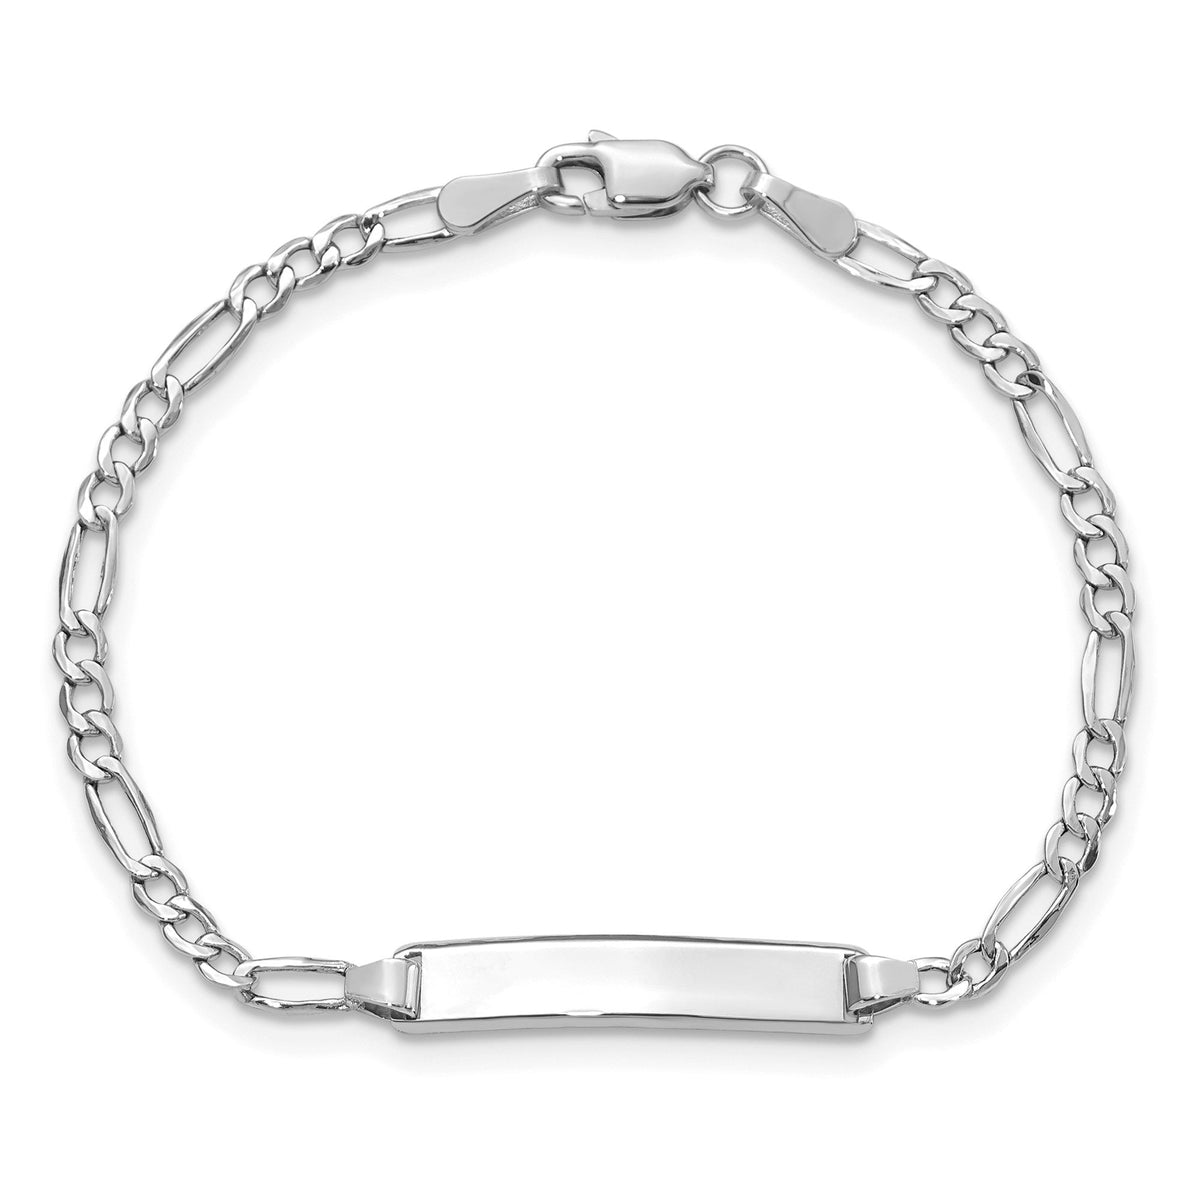 Children's 14k White Gold Personalized ID Figaro Bracelet - 5.5in, 6in, & 7inches  ENGRAVING  6 months -7 Years Old - Gift Box Included